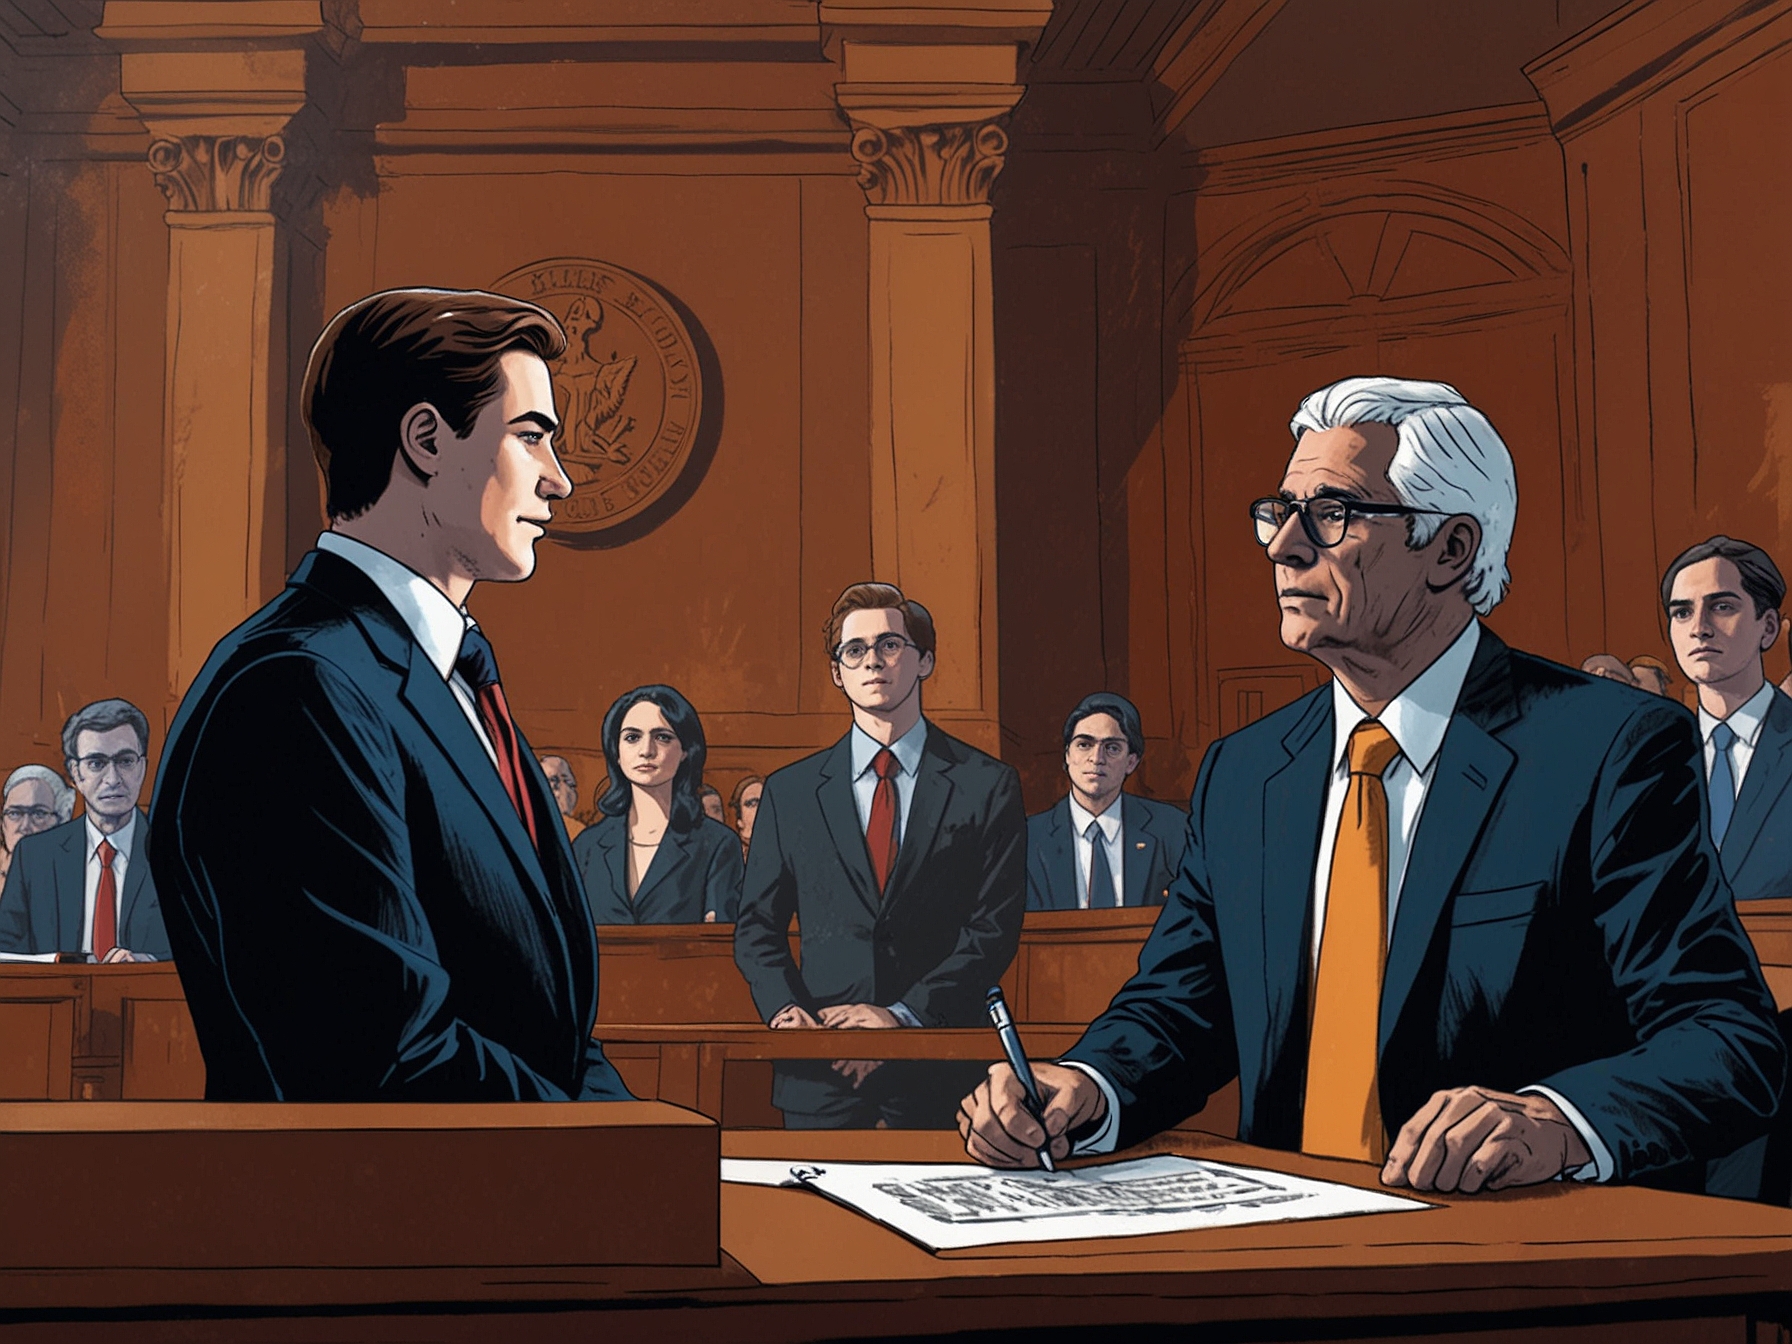 A courtroom scene with TikTok's legal team on one side and U.S. government representatives on the other, emphasizing the intense legal battle over the app’s future.